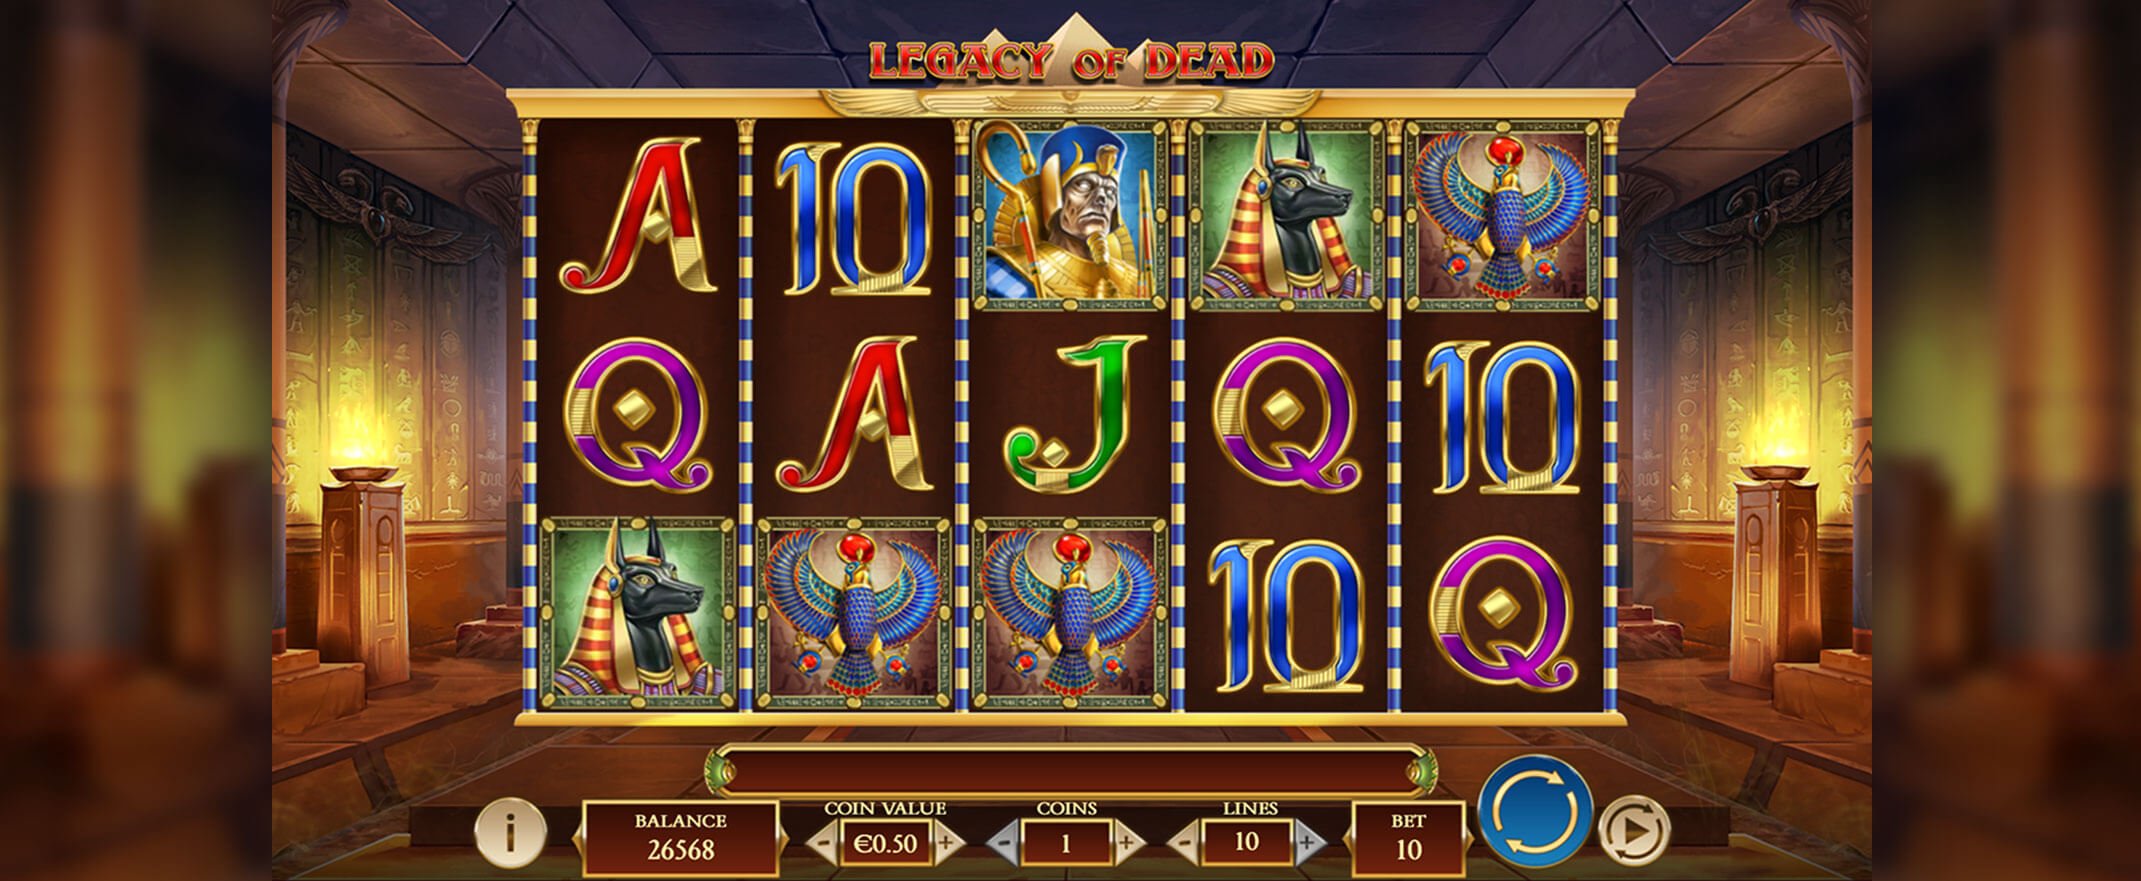 Legacy of Dead slot by Play'n Go